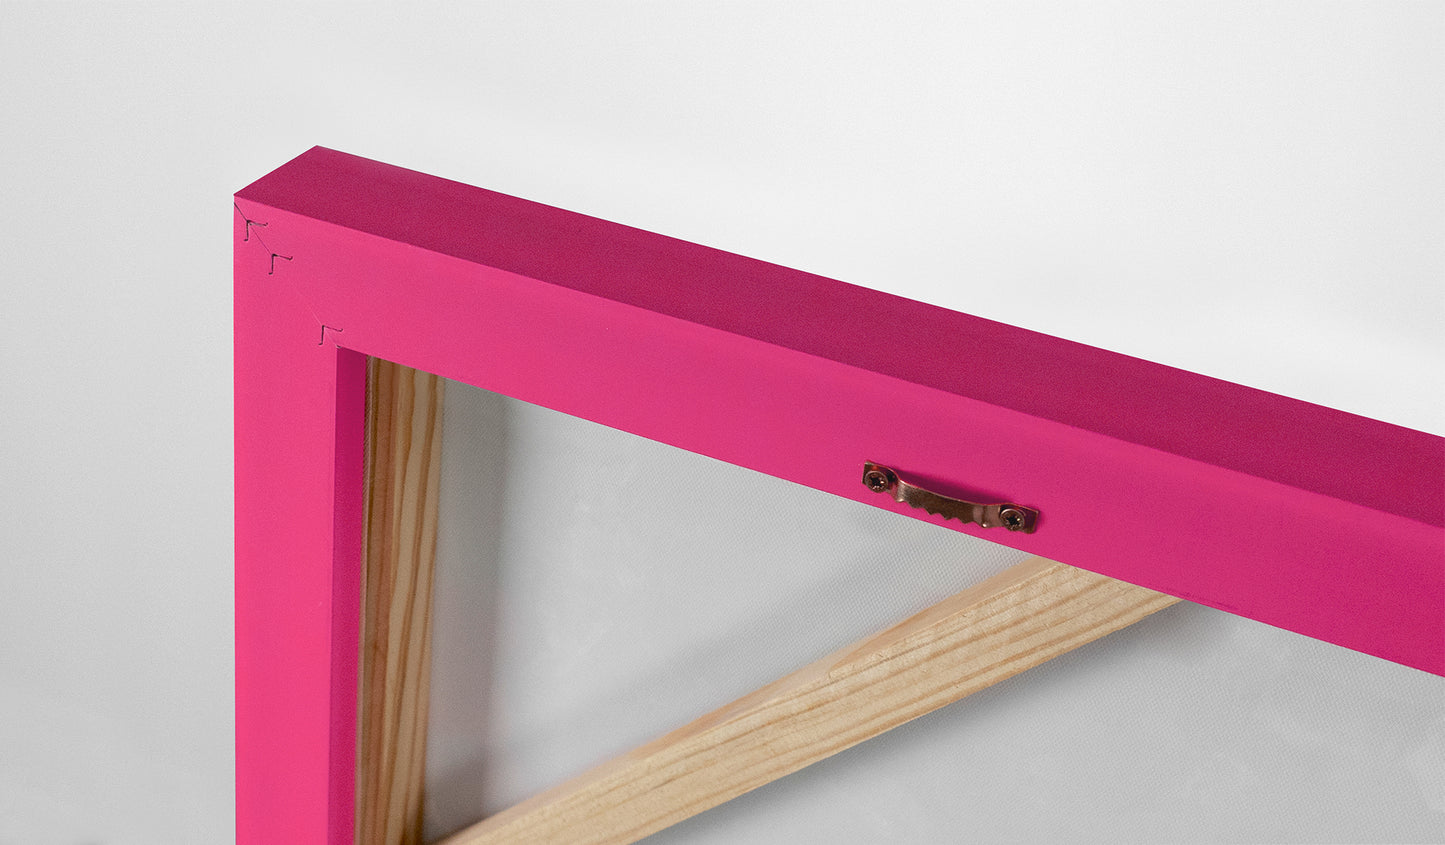 painting with a pink frame with a conveniet hanger